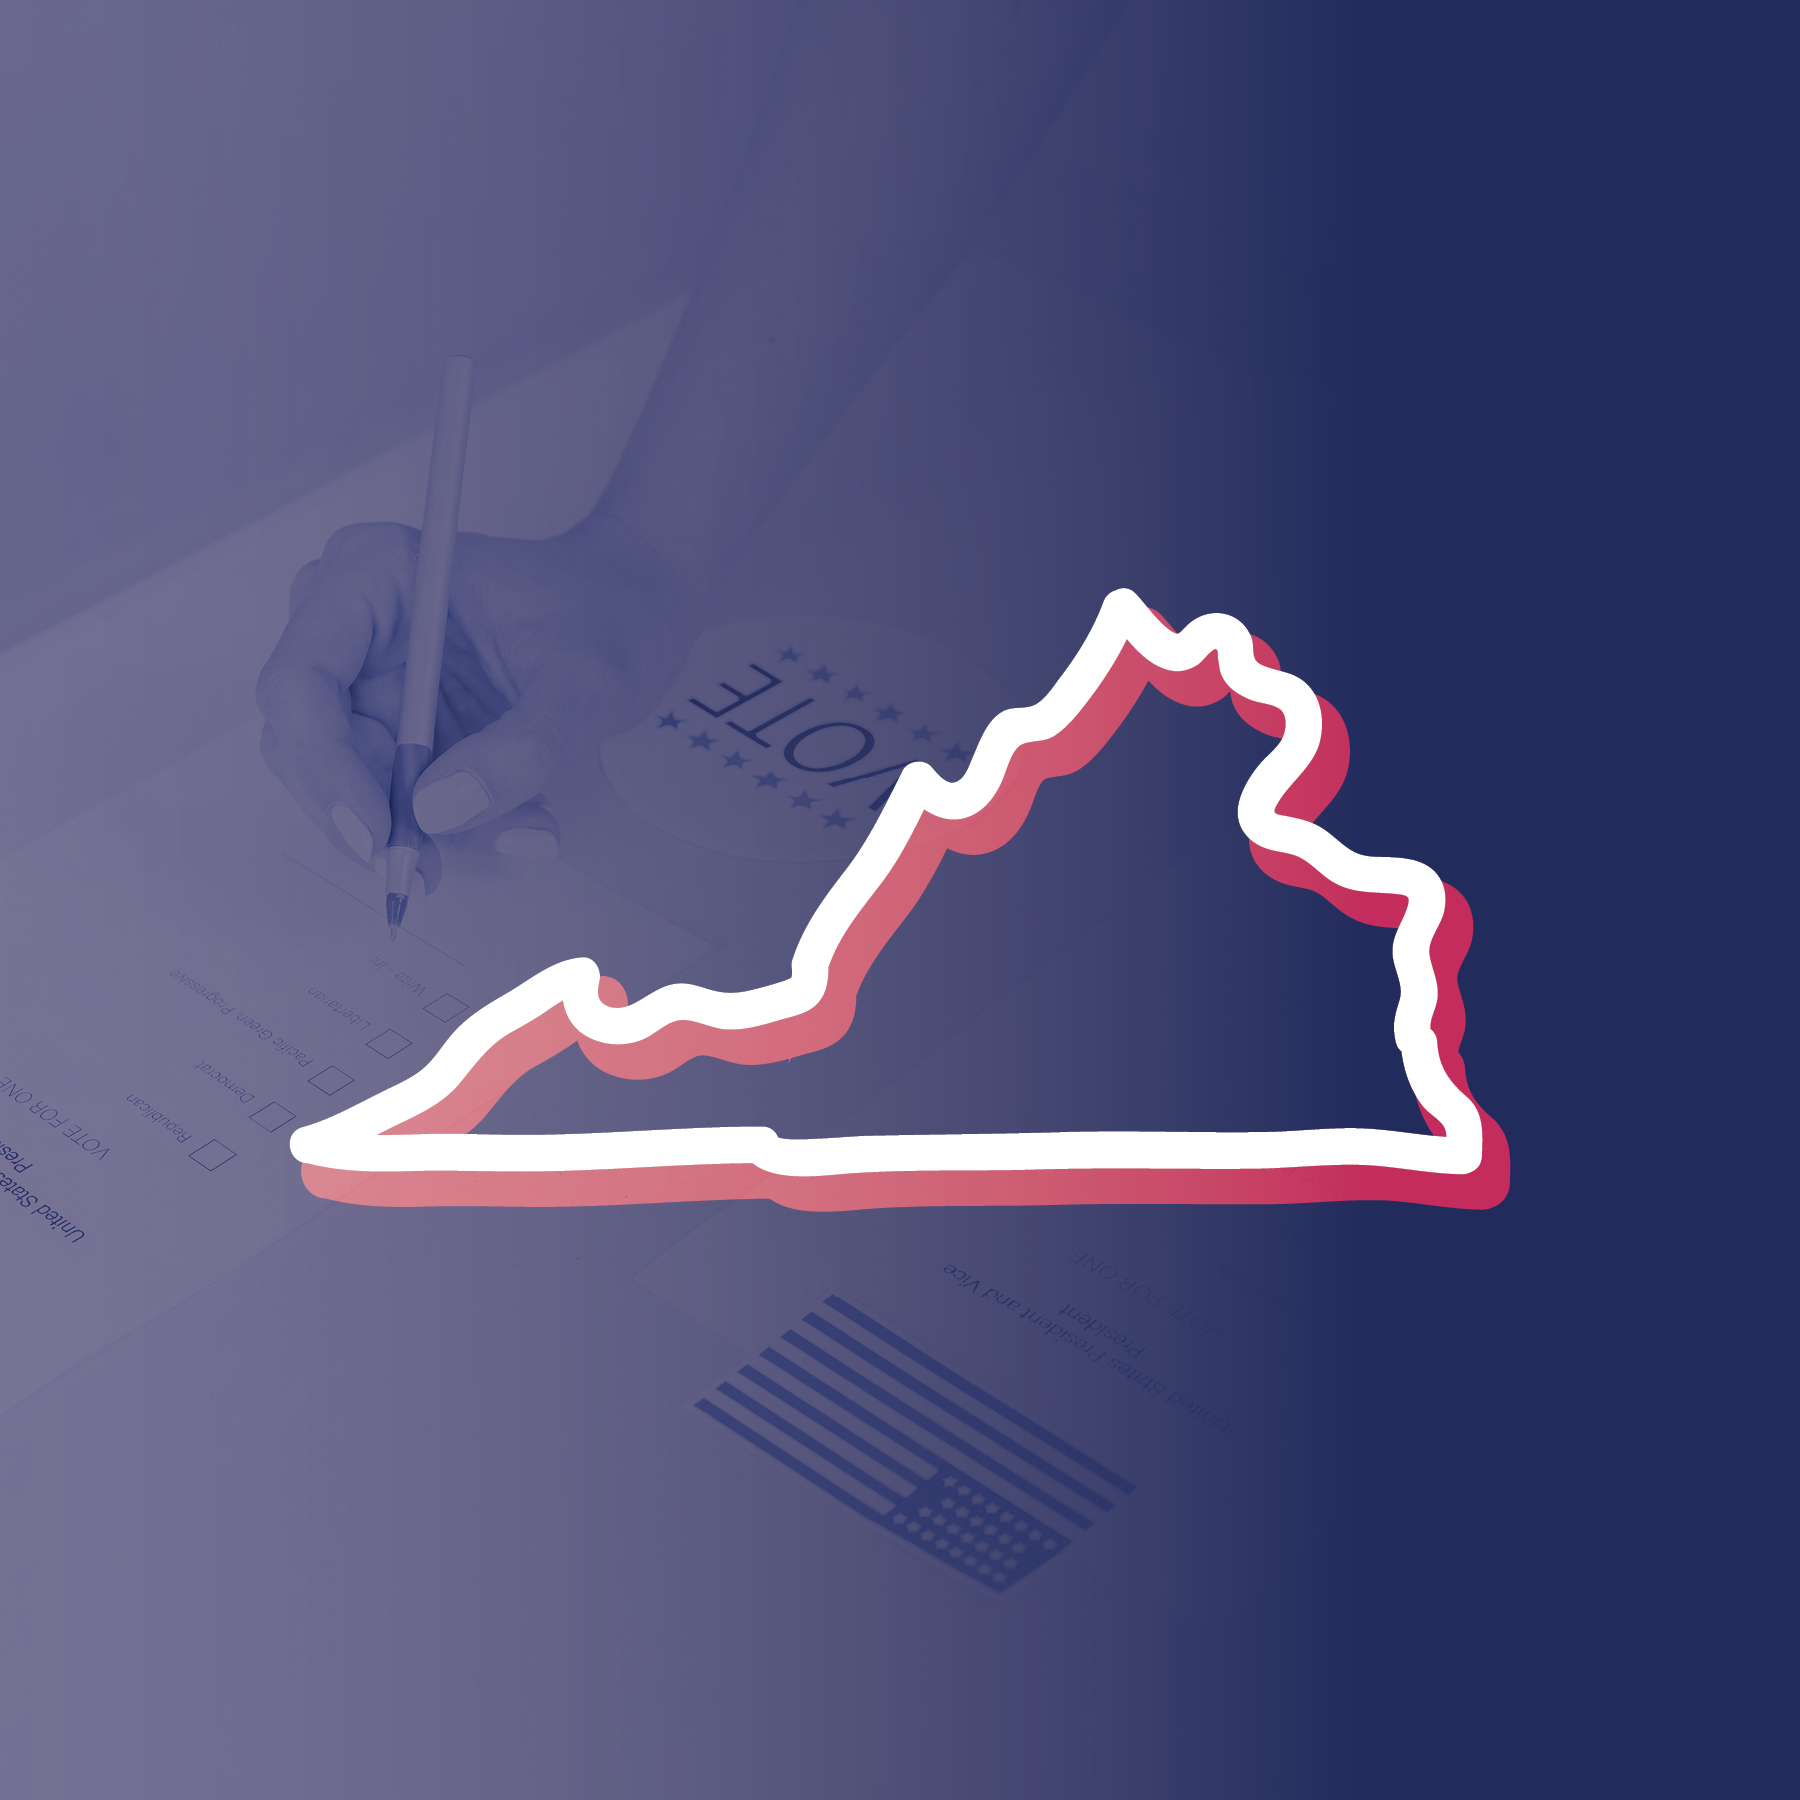 Illustration of the outline of the state of Virginia in the foreground, over the photo of a woman's hand as she fills in a ballot.